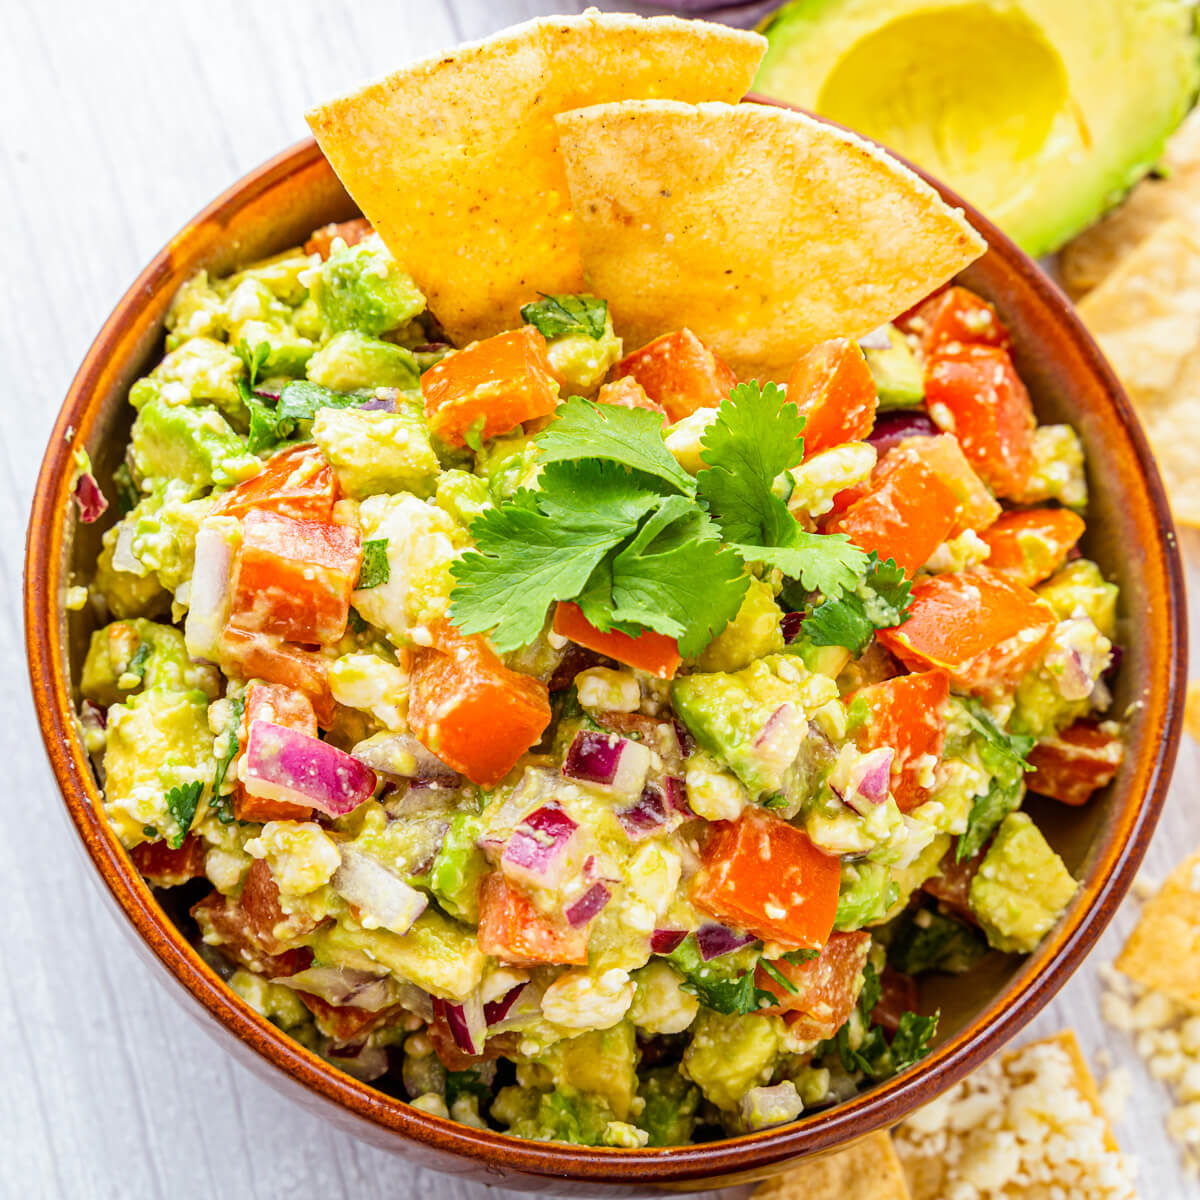 A terra cotta bowl full of chunky avocado salsa featuring avocado, tomatoes, cilantro, Cotija cheese, and red onions garnished with tortilla chips.